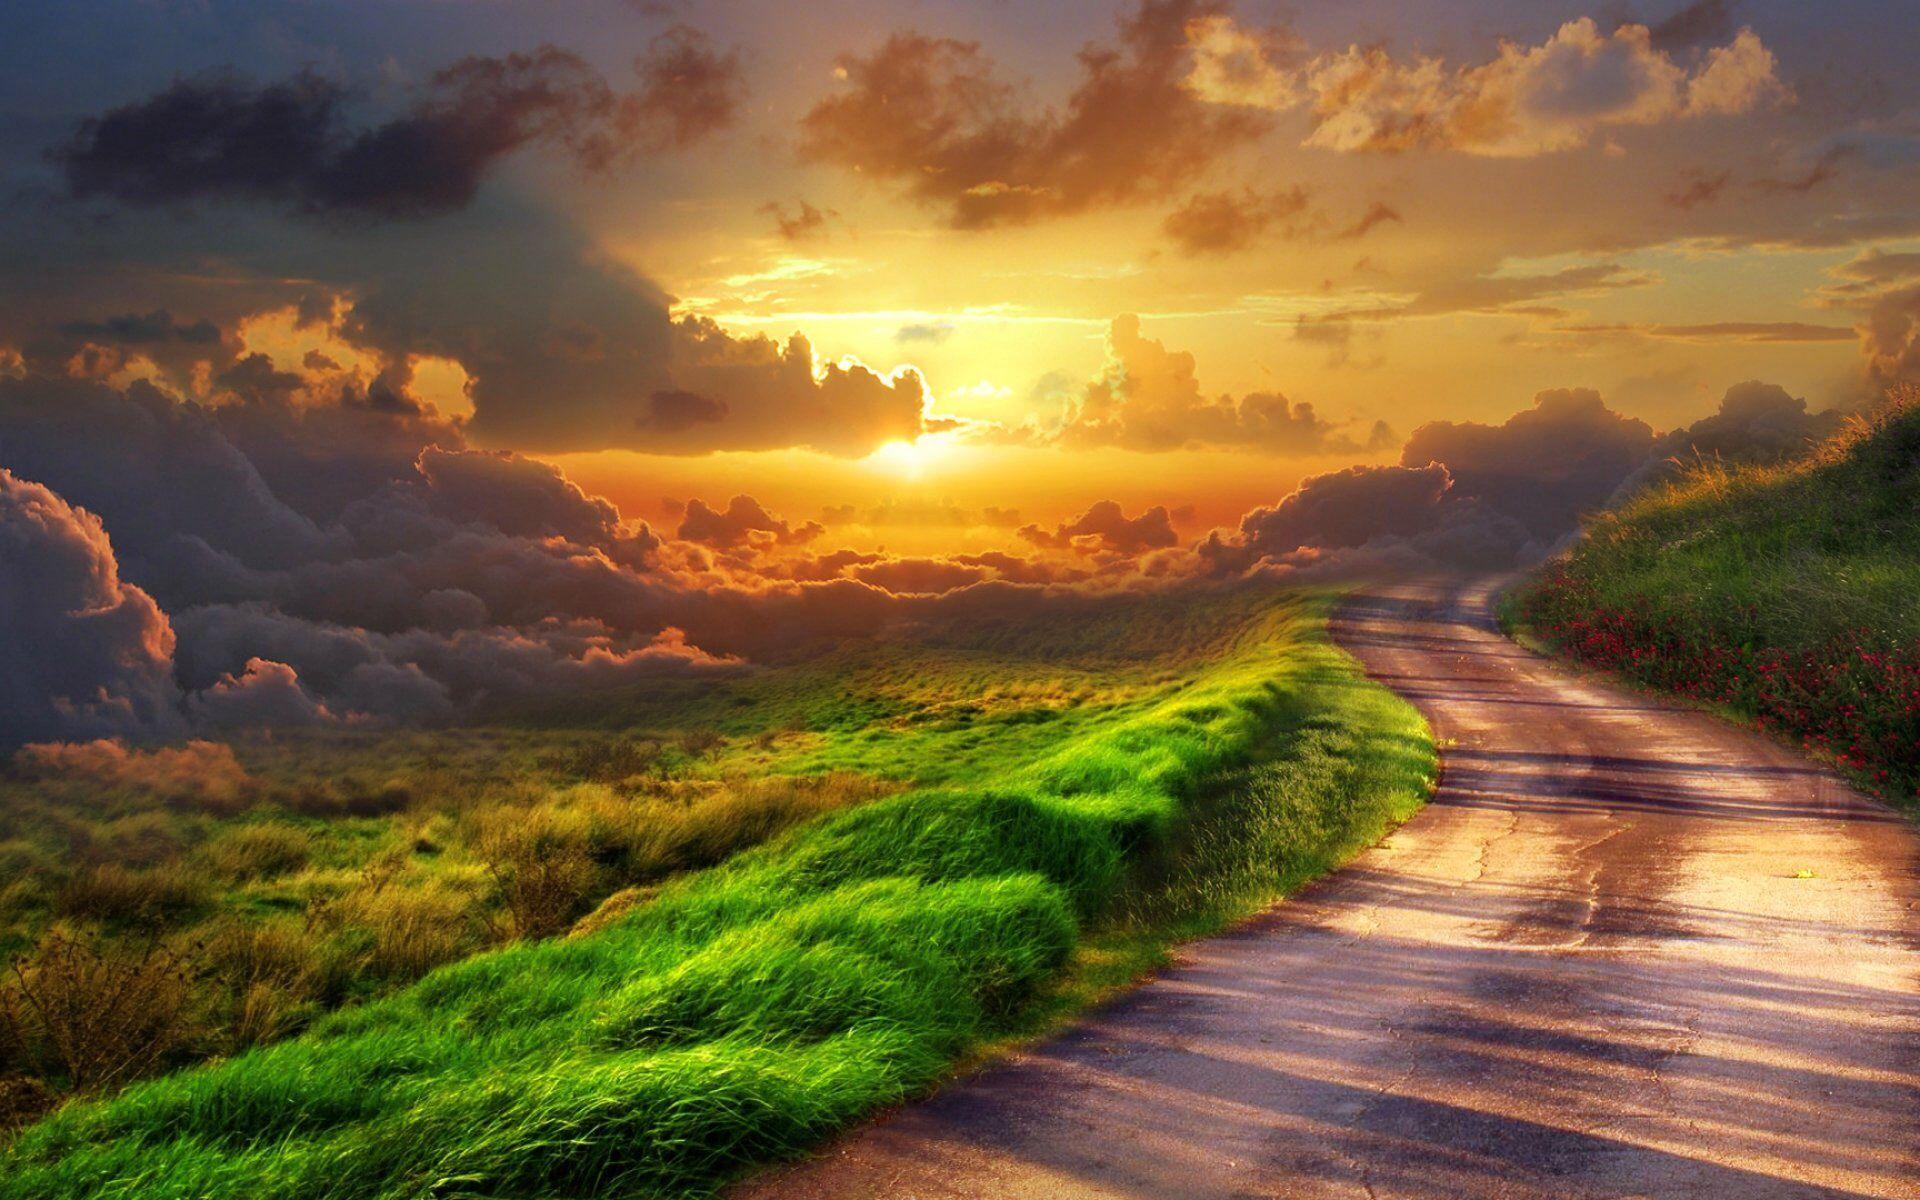 Heaven image Road to heaven HD wallpapers and backgrounds photos.